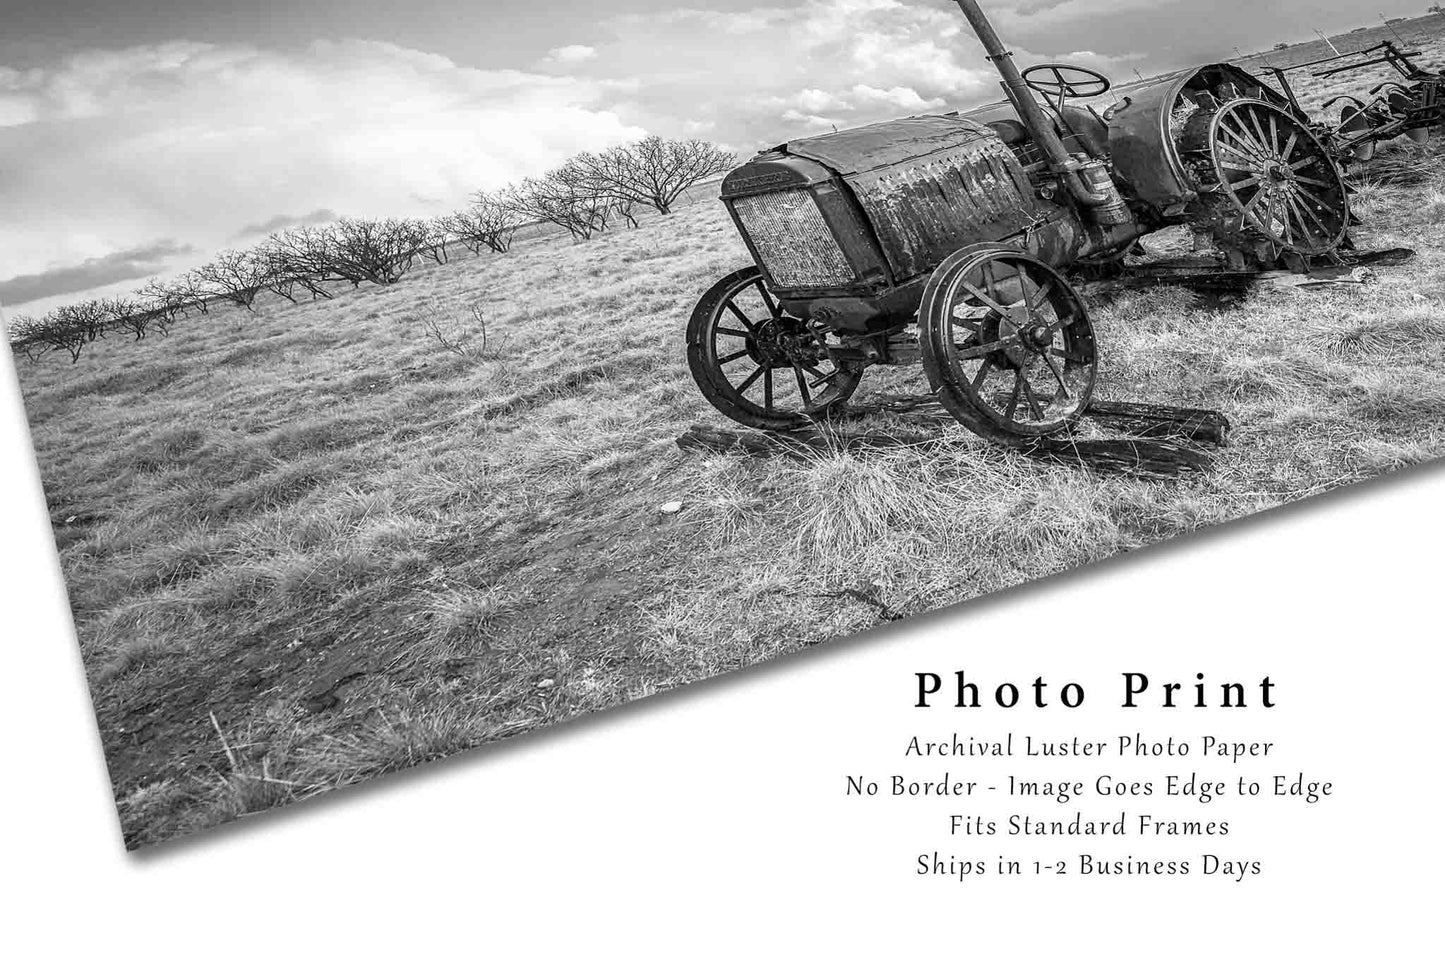 Country Photography Print (Not Framed) Black and White Picture of Classic McCormick-Deering Tractor on Stormy Day in Texas Farm Wall Art Farmhouse Decor